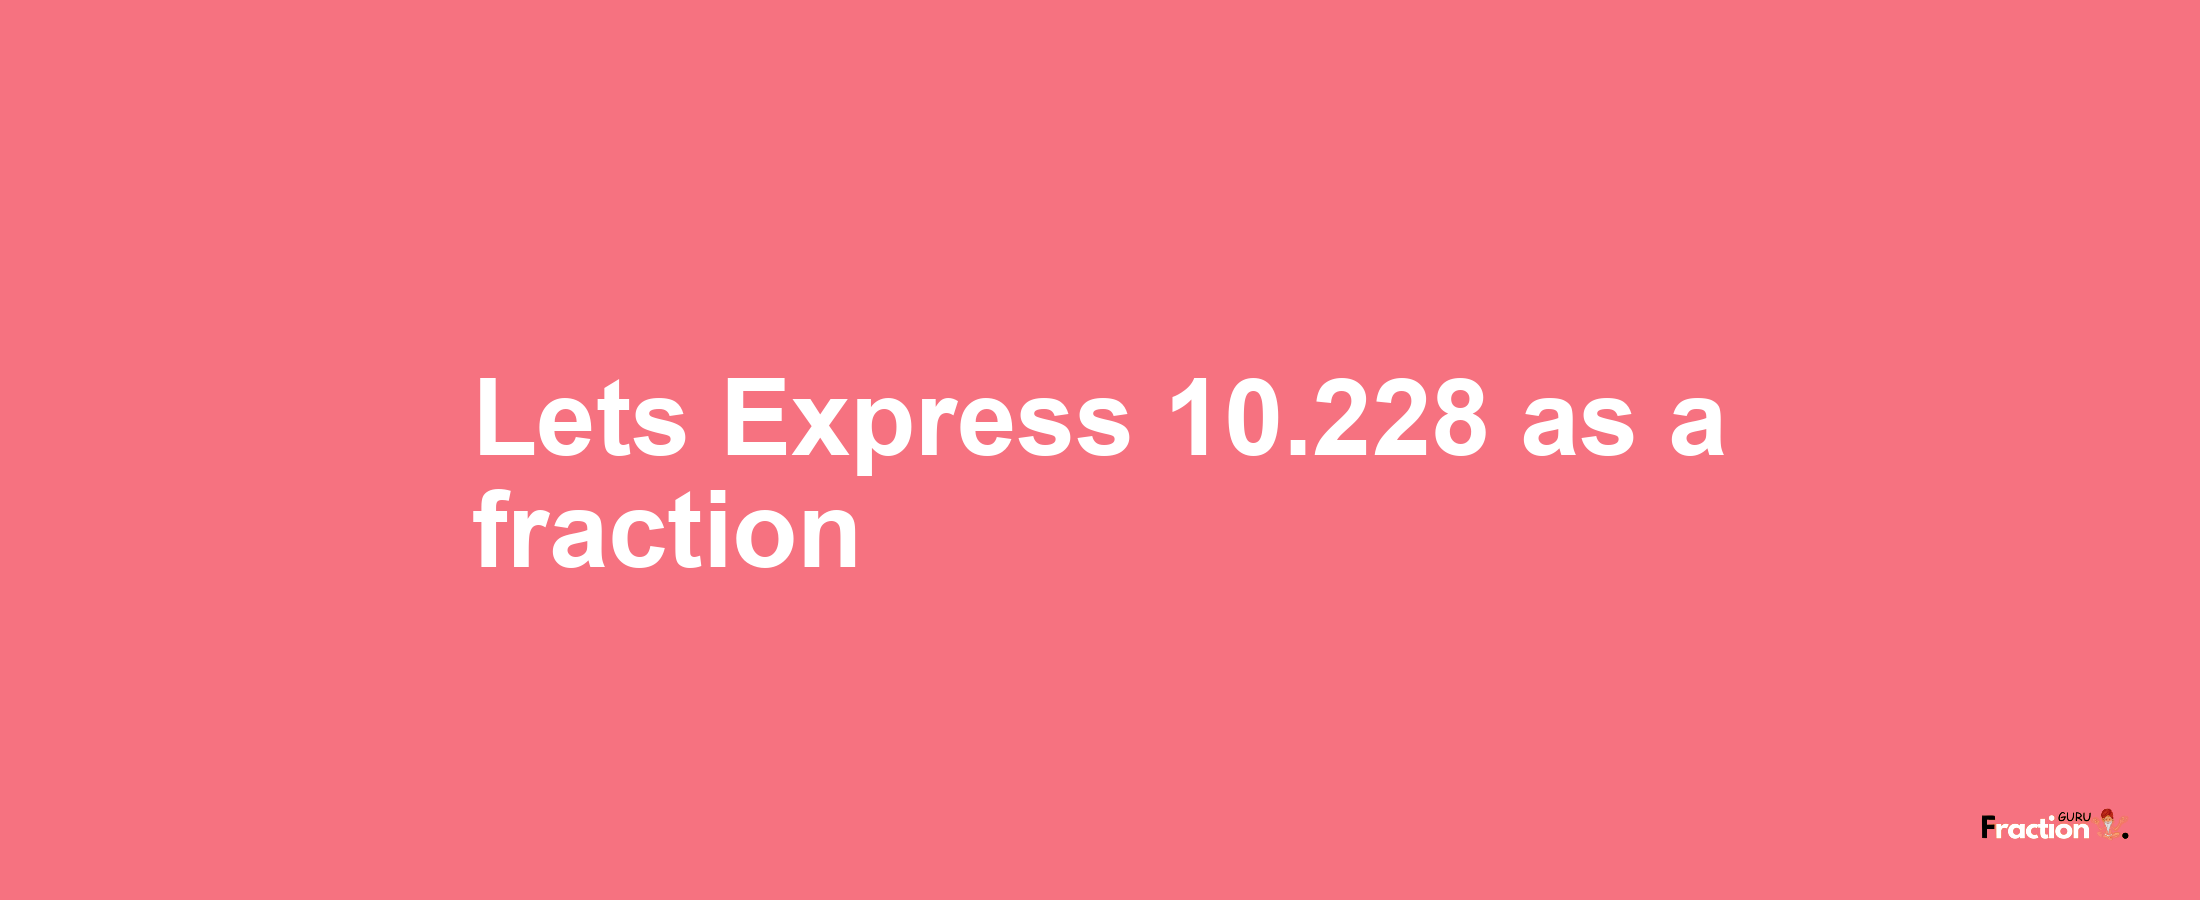 Lets Express 10.228 as afraction